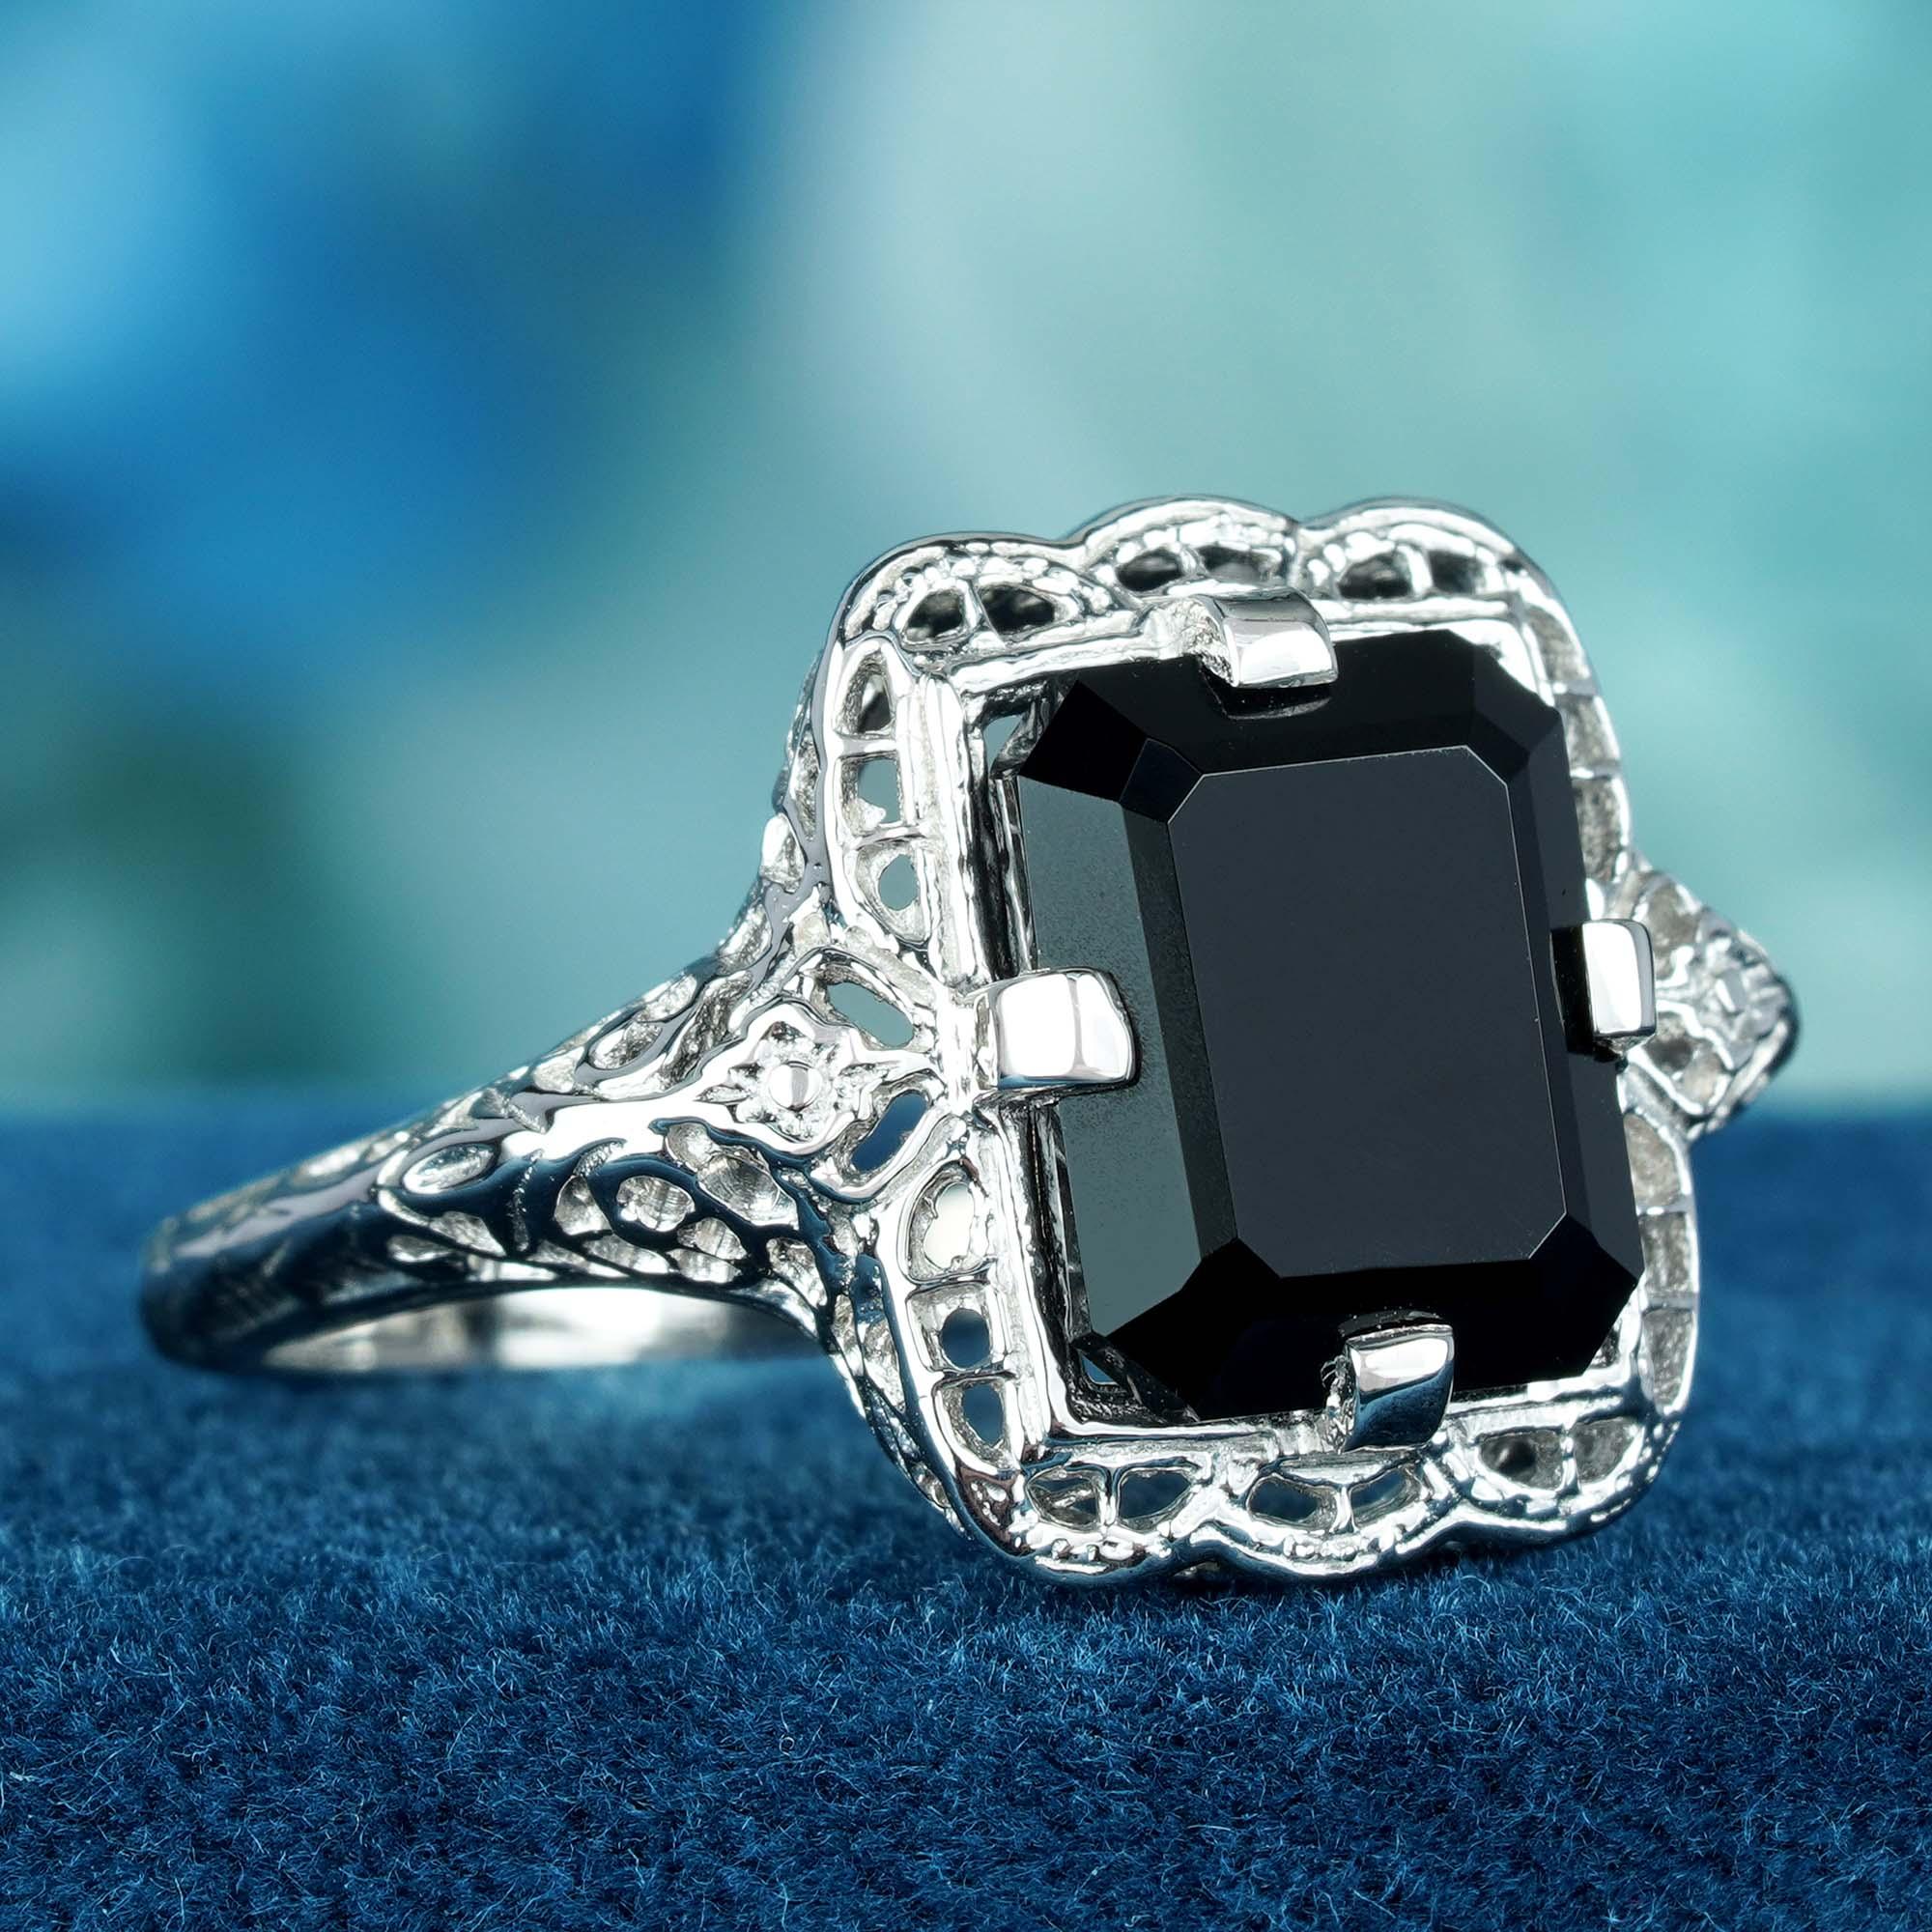 Experience the allure of a bygone era with this timeless piece, meticulously crafted from solid white gold. Adorned with a captivating 3.5-carat natural onyx gemstone in a prong setting, the onyx exudes an enigmatic depth reminiscent of moonlit